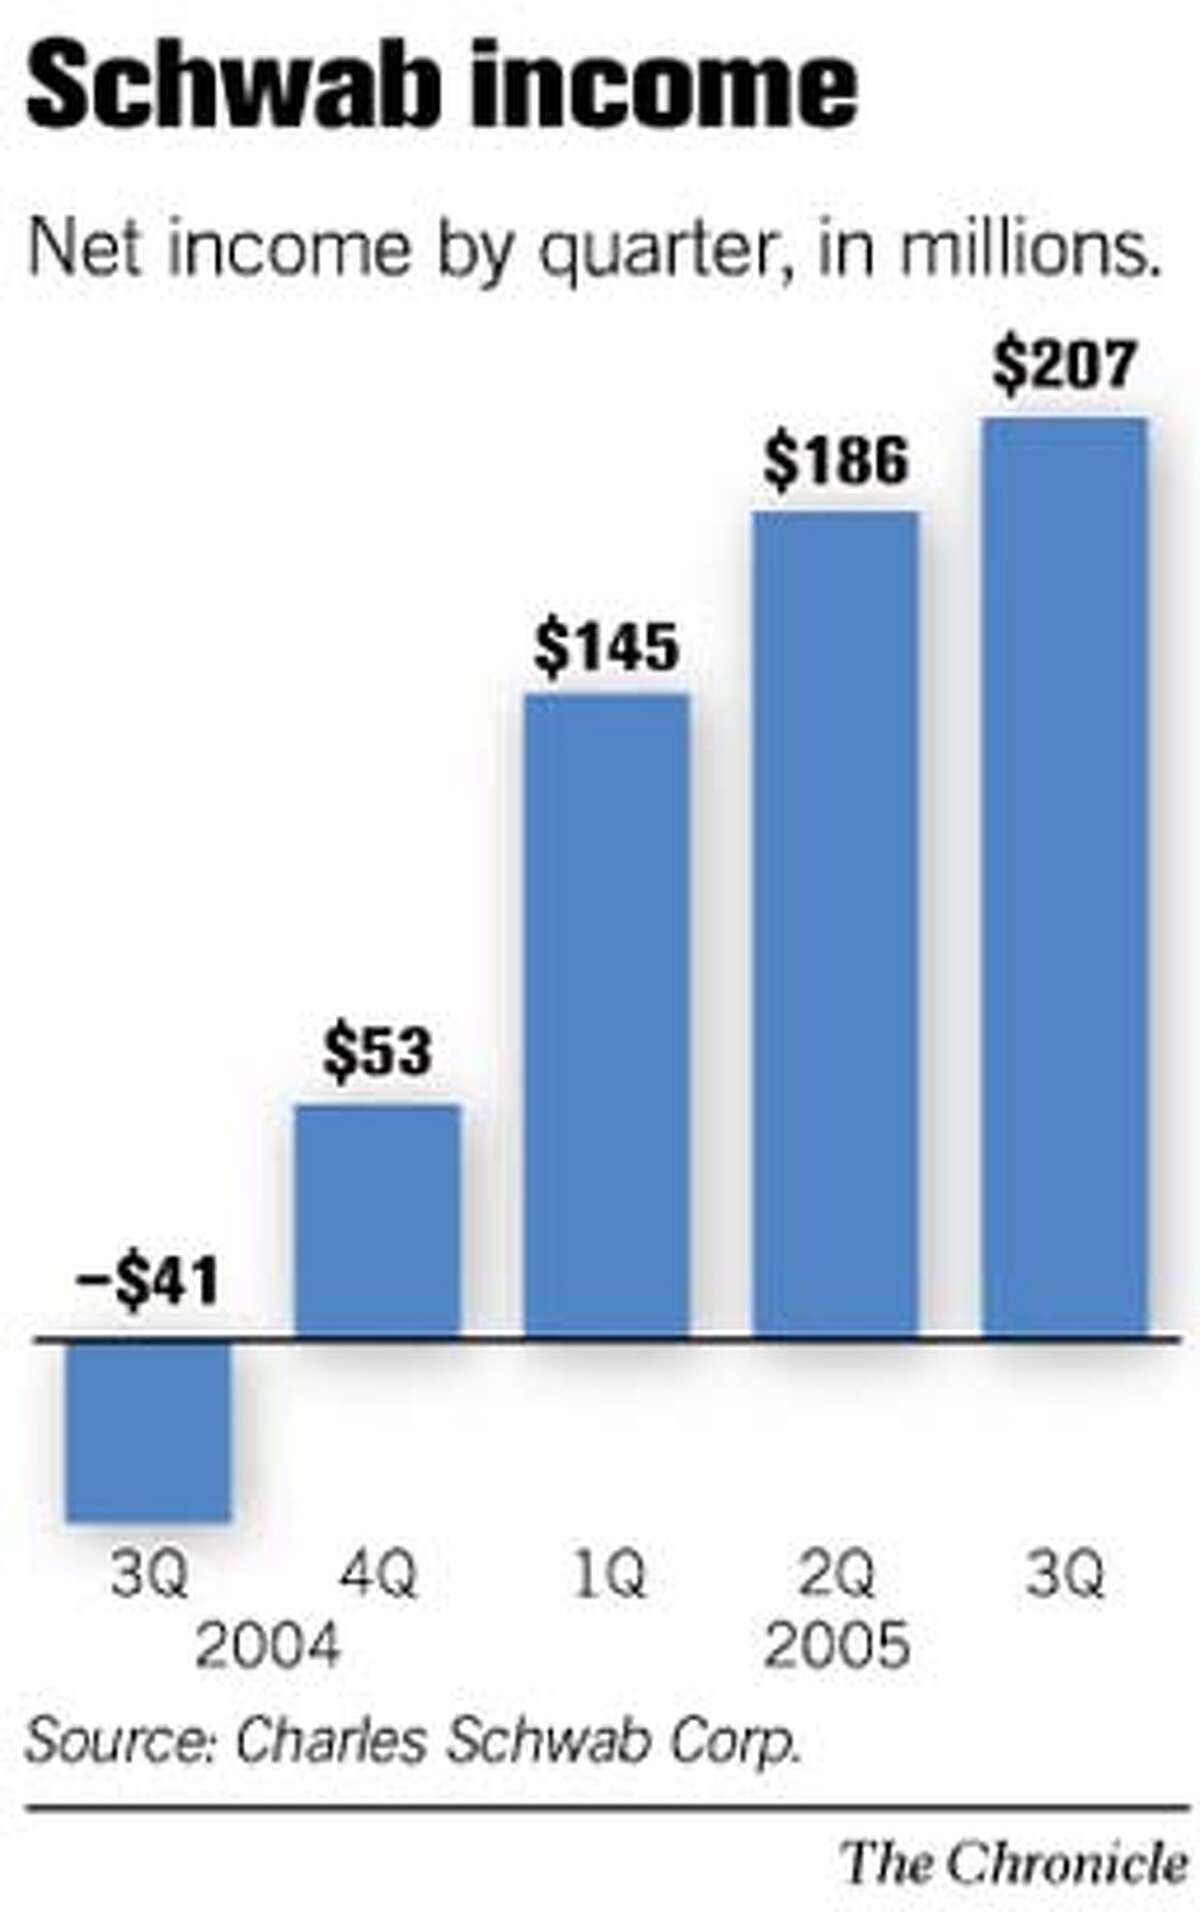 Schwab Income. Chronicle Graphic